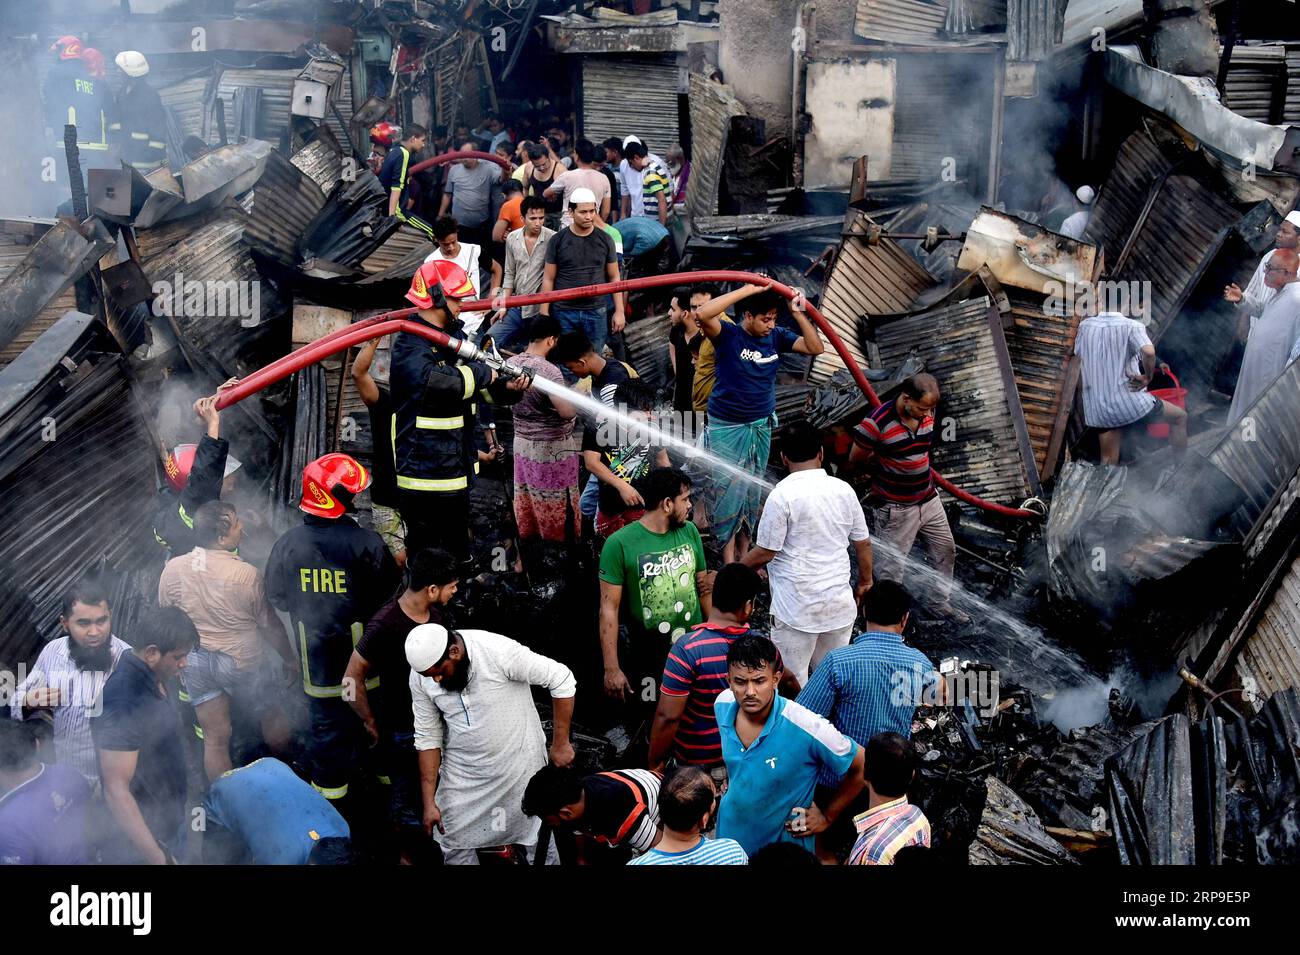 (190404) -- DHAKA, April 4, 2019 -- Local people help firefighters spray water to douse flame after a fire broke out at a kitchen market in Dhaka, Bangladesh, April 4, 2019. An early morning fire gutted dozens of shops in a kitchen market in Bangladesh capital Dhaka on Thursday, Kazi Nazmuzzaman, deputy assistant director of Fire Service and Civil Defense, told Xinhua. ) BANGLADESH-DHAKA-KITCHEN MARKET-FIRE Stringer PUBLICATIONxNOTxINxCHN Stock Photo